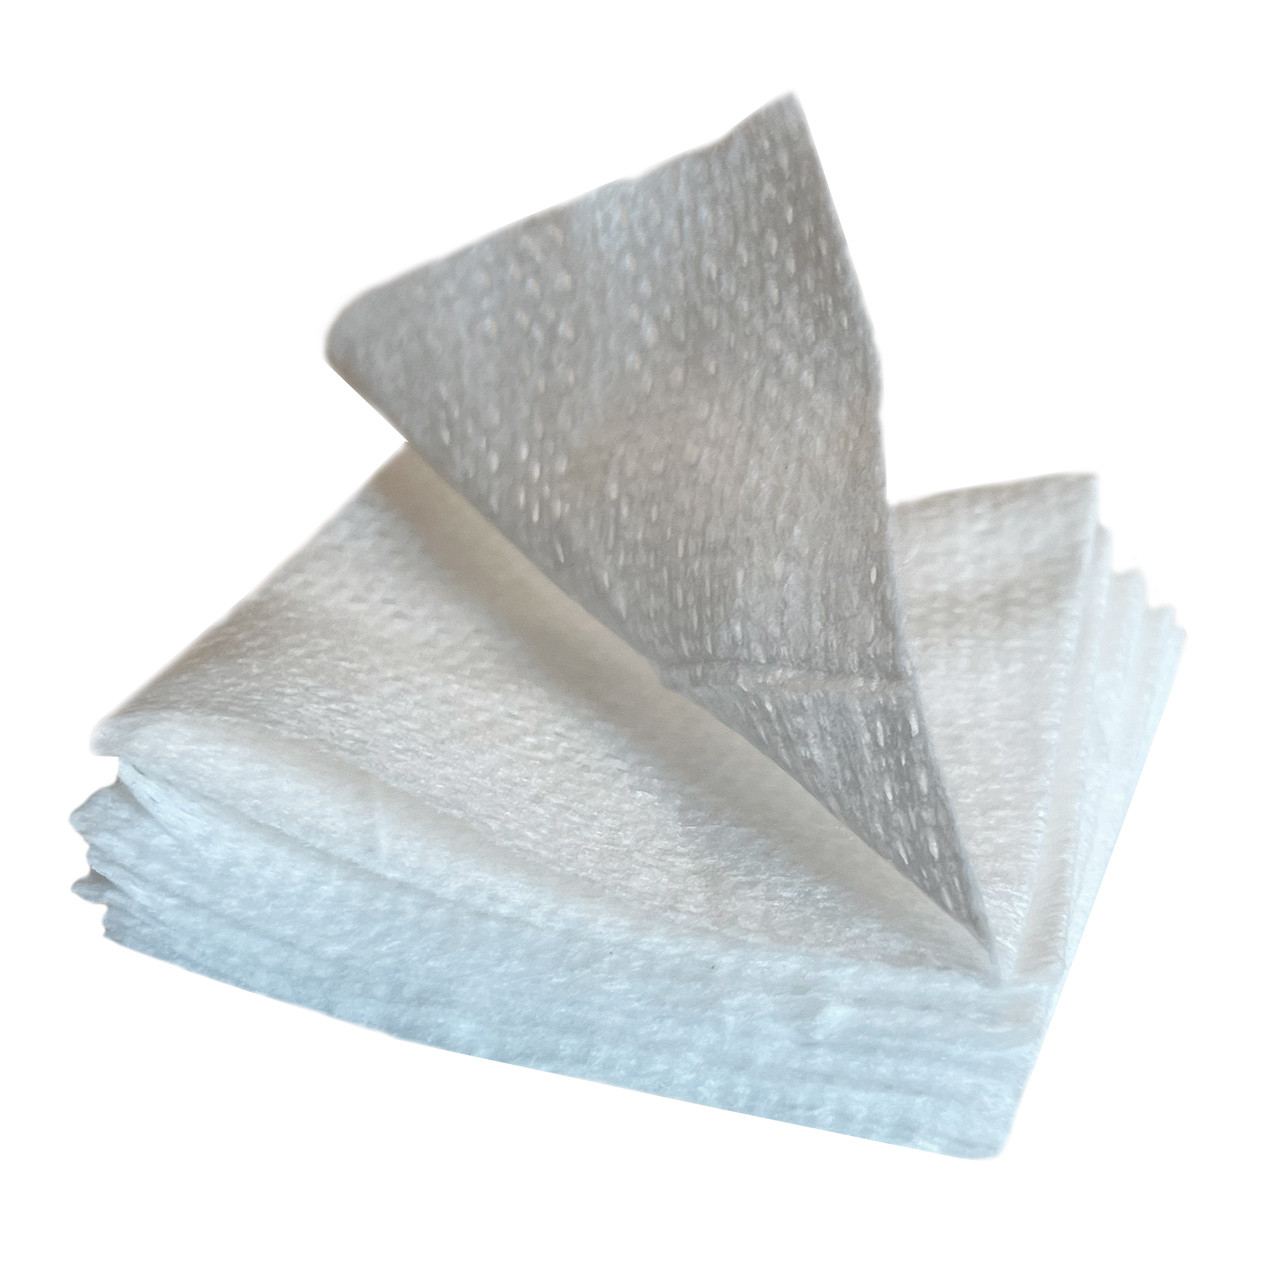 TrueClot Simulated gauze out of packaging showing product itself